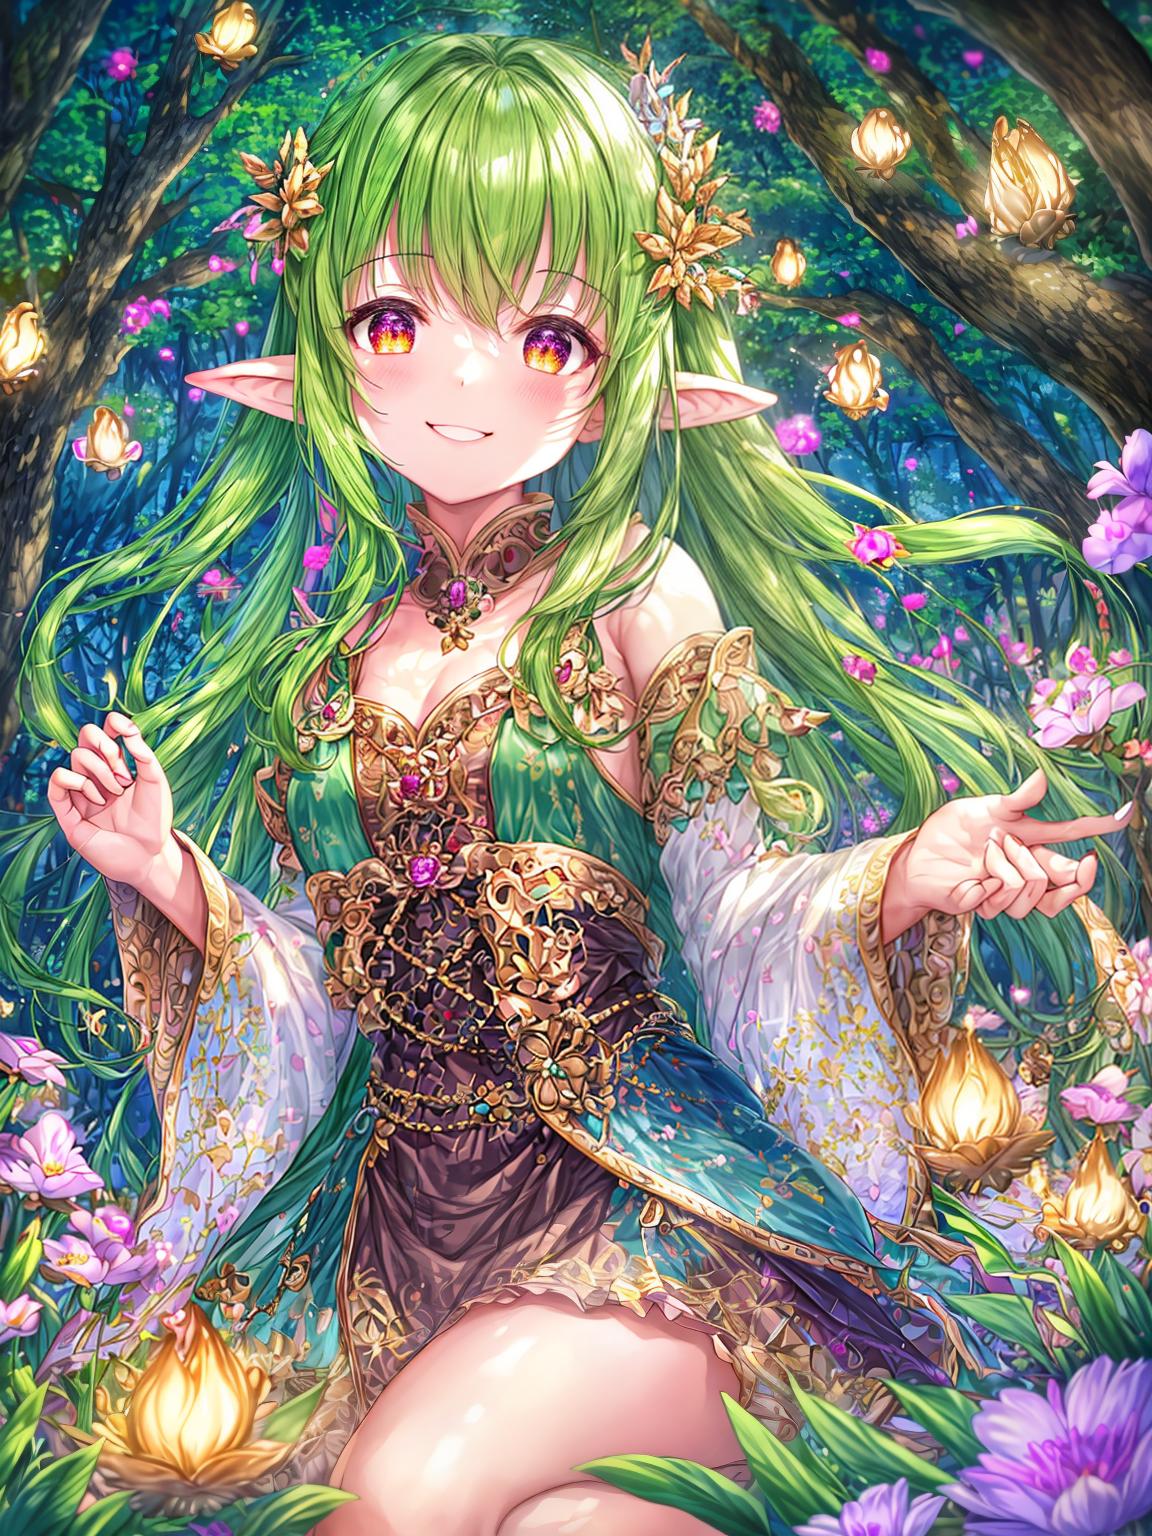  master piece, best quality, ultra detailed, highres, 4k.8k, Tiny, smiling, fairy, Smiling, surrounded by glowing fireflies, Joyful, BREAK Enchanting forest fairy, Mysterious forest, Glowing mushrooms, shimmering dewdrops, magical flowers, ancient trees, BREAK Mysterious and serene, Soft lighting, ethereal aura, glowing gradients, misty ambiance,